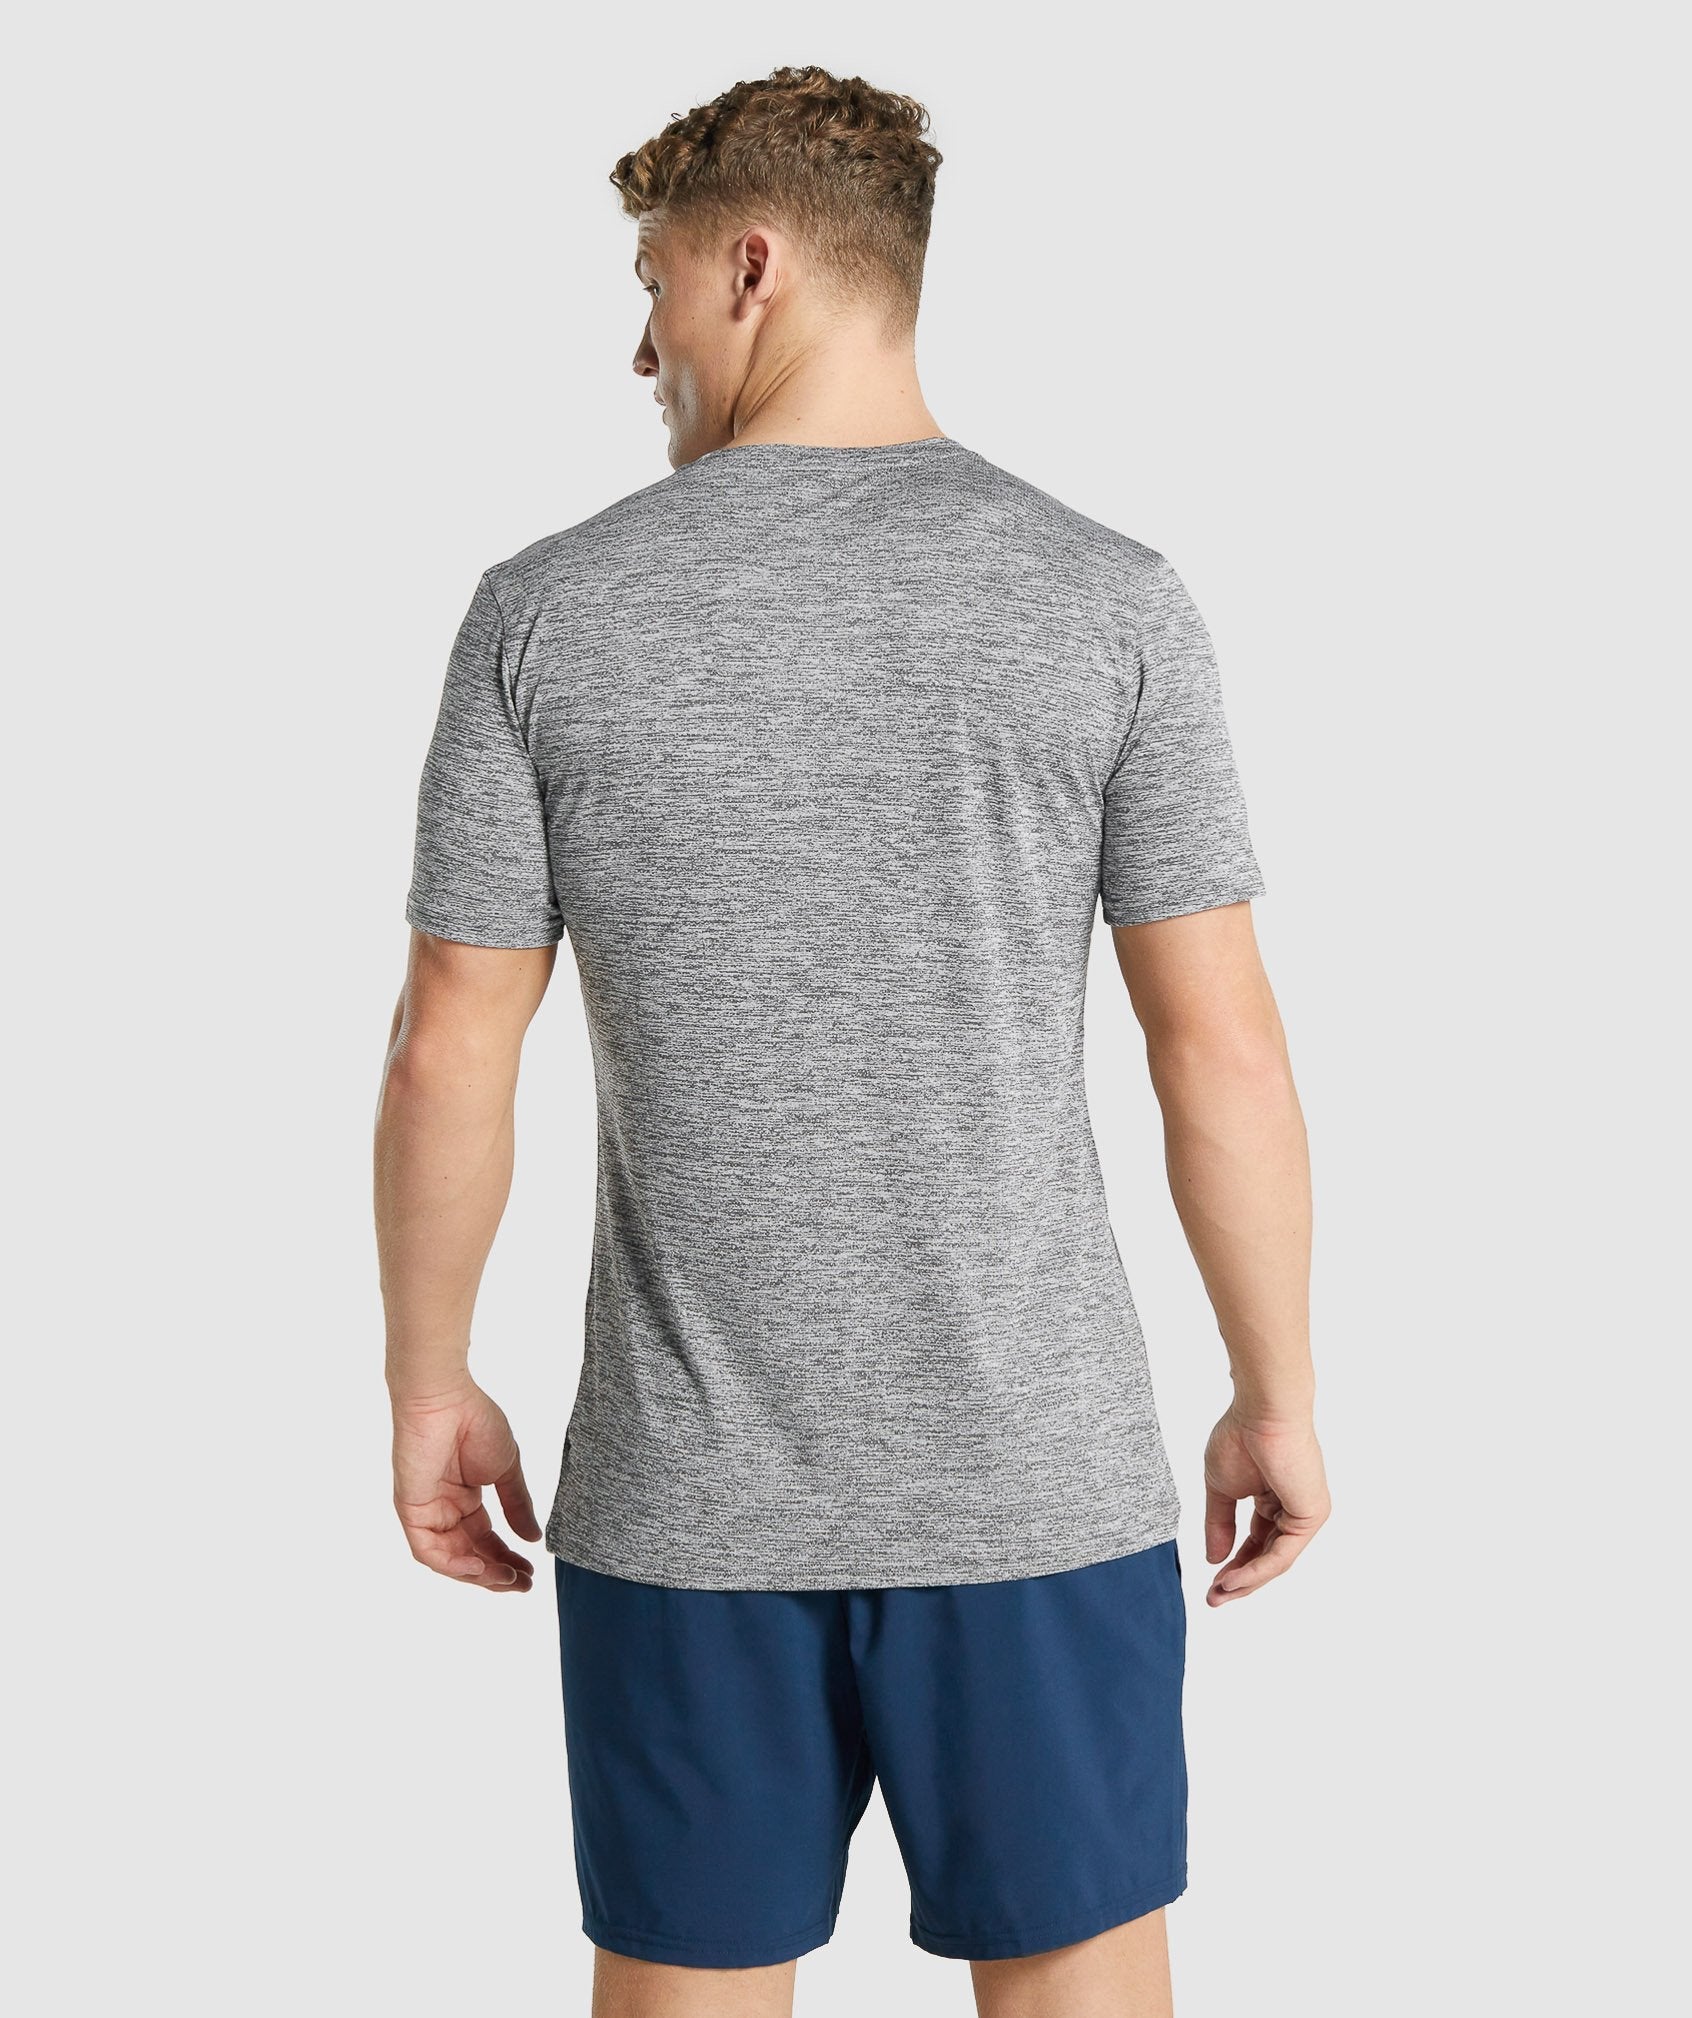 Arrival Marl T-Shirt in Charcoal Marl